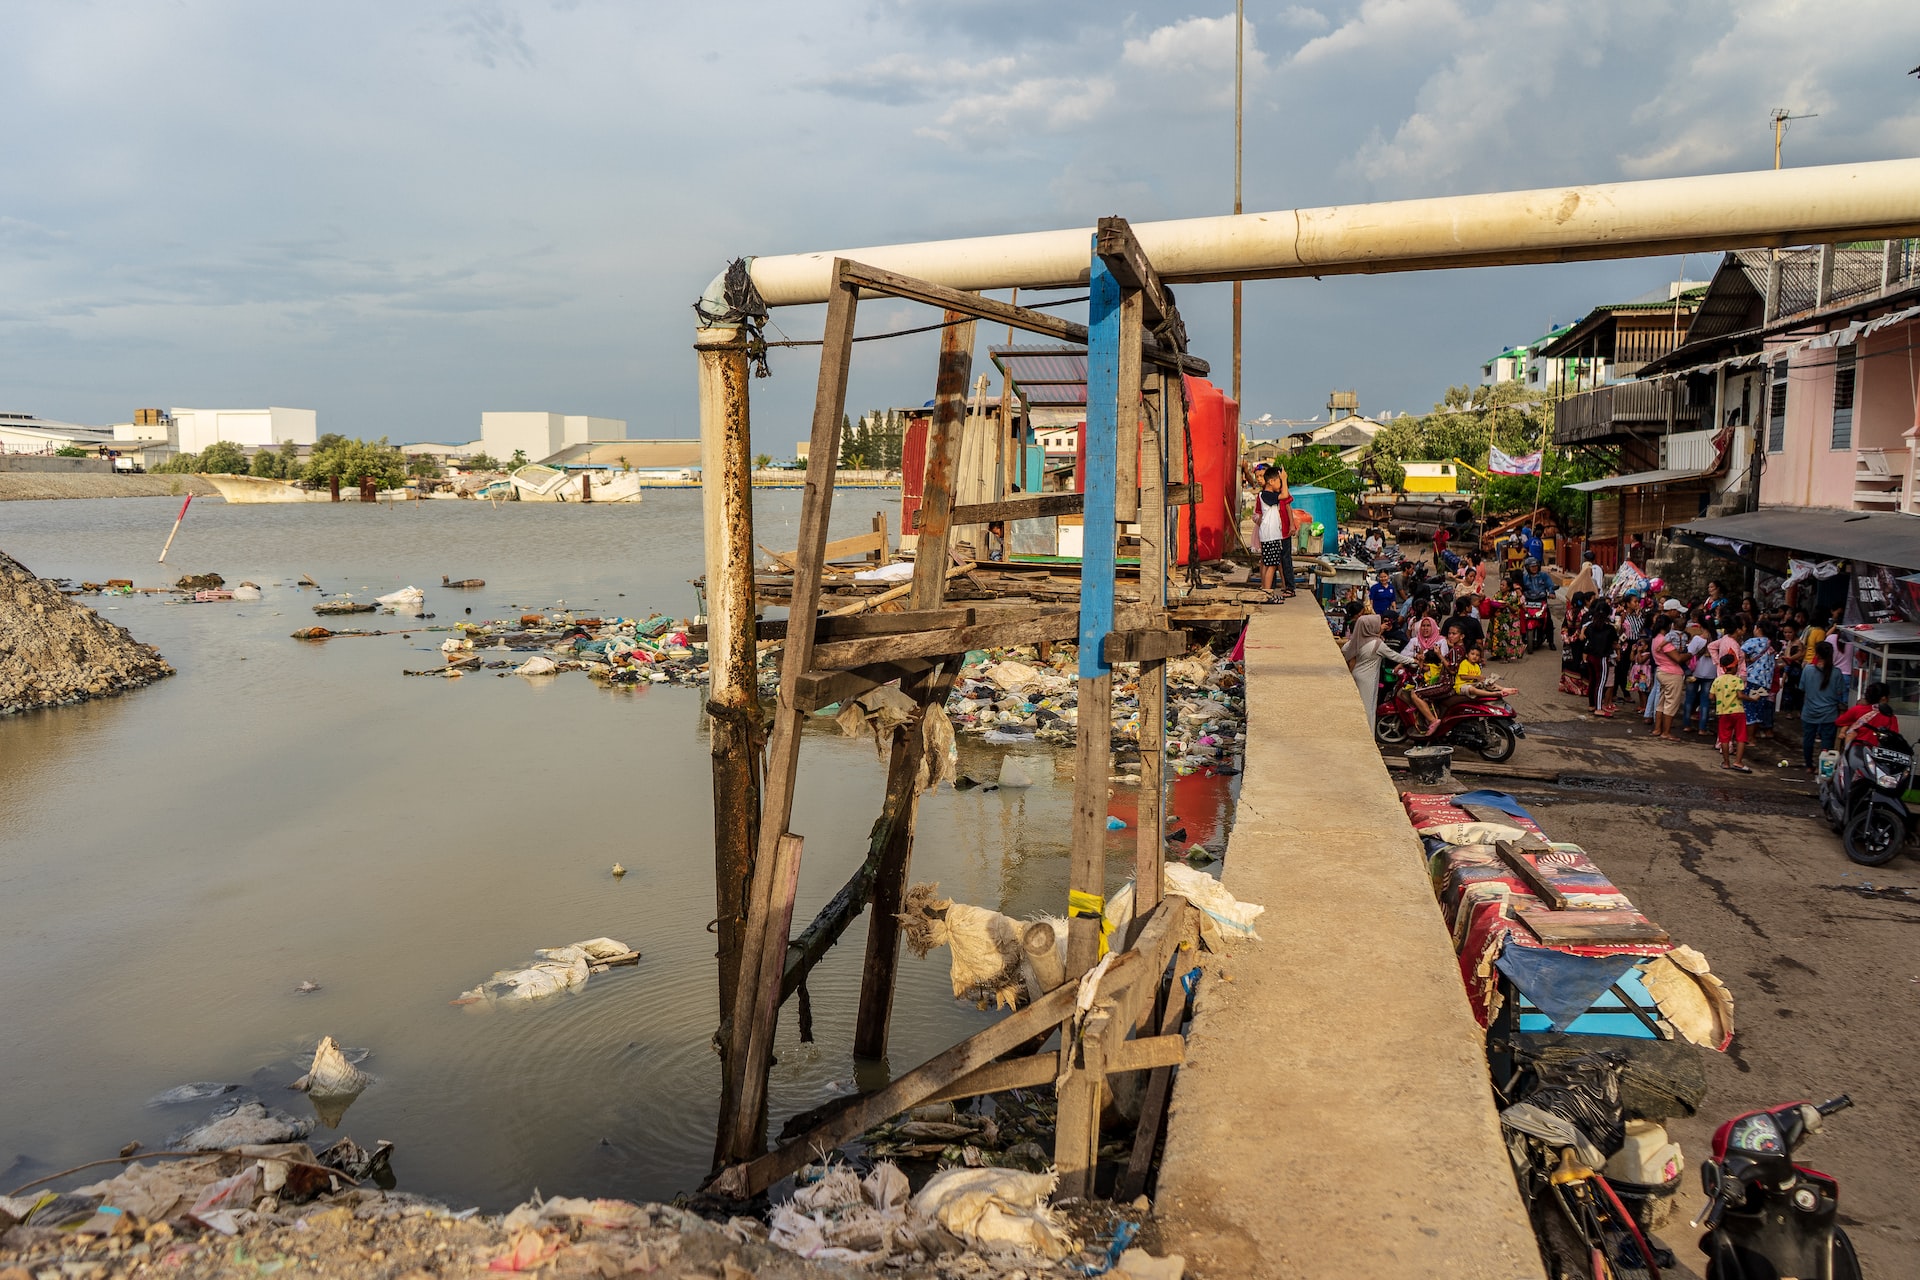 Residents in Muara Baru, one of the fastest sinking areas in Jakarta, live below sea level, protected only by a concrete wall. Credit photo: Tim Shepherd on Unsplash